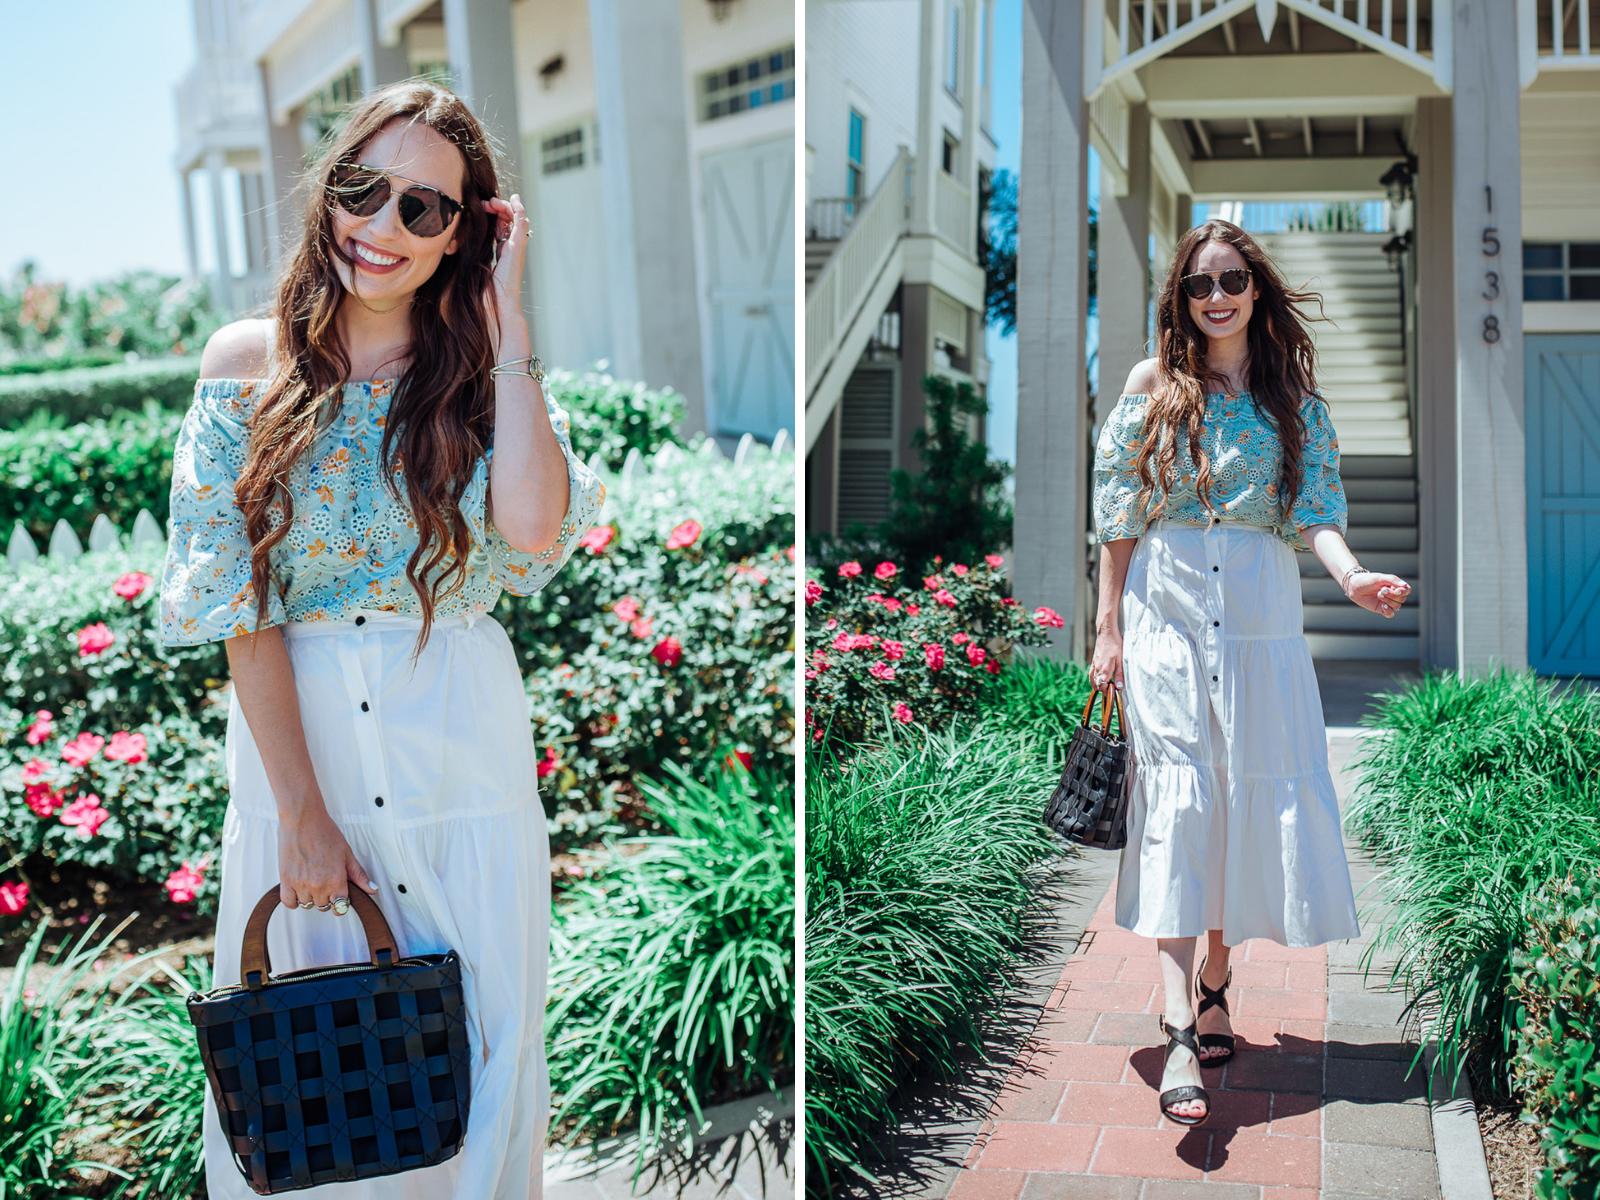 Stylish Platform Wedge Sandals for Summer featured by top US fashion blog, Lone Star Looking Glass: image of a woman wearing Solid & Striped long skirt, Anthropologie off the shoulder floral blouse, and Sofft platform wedge sandals